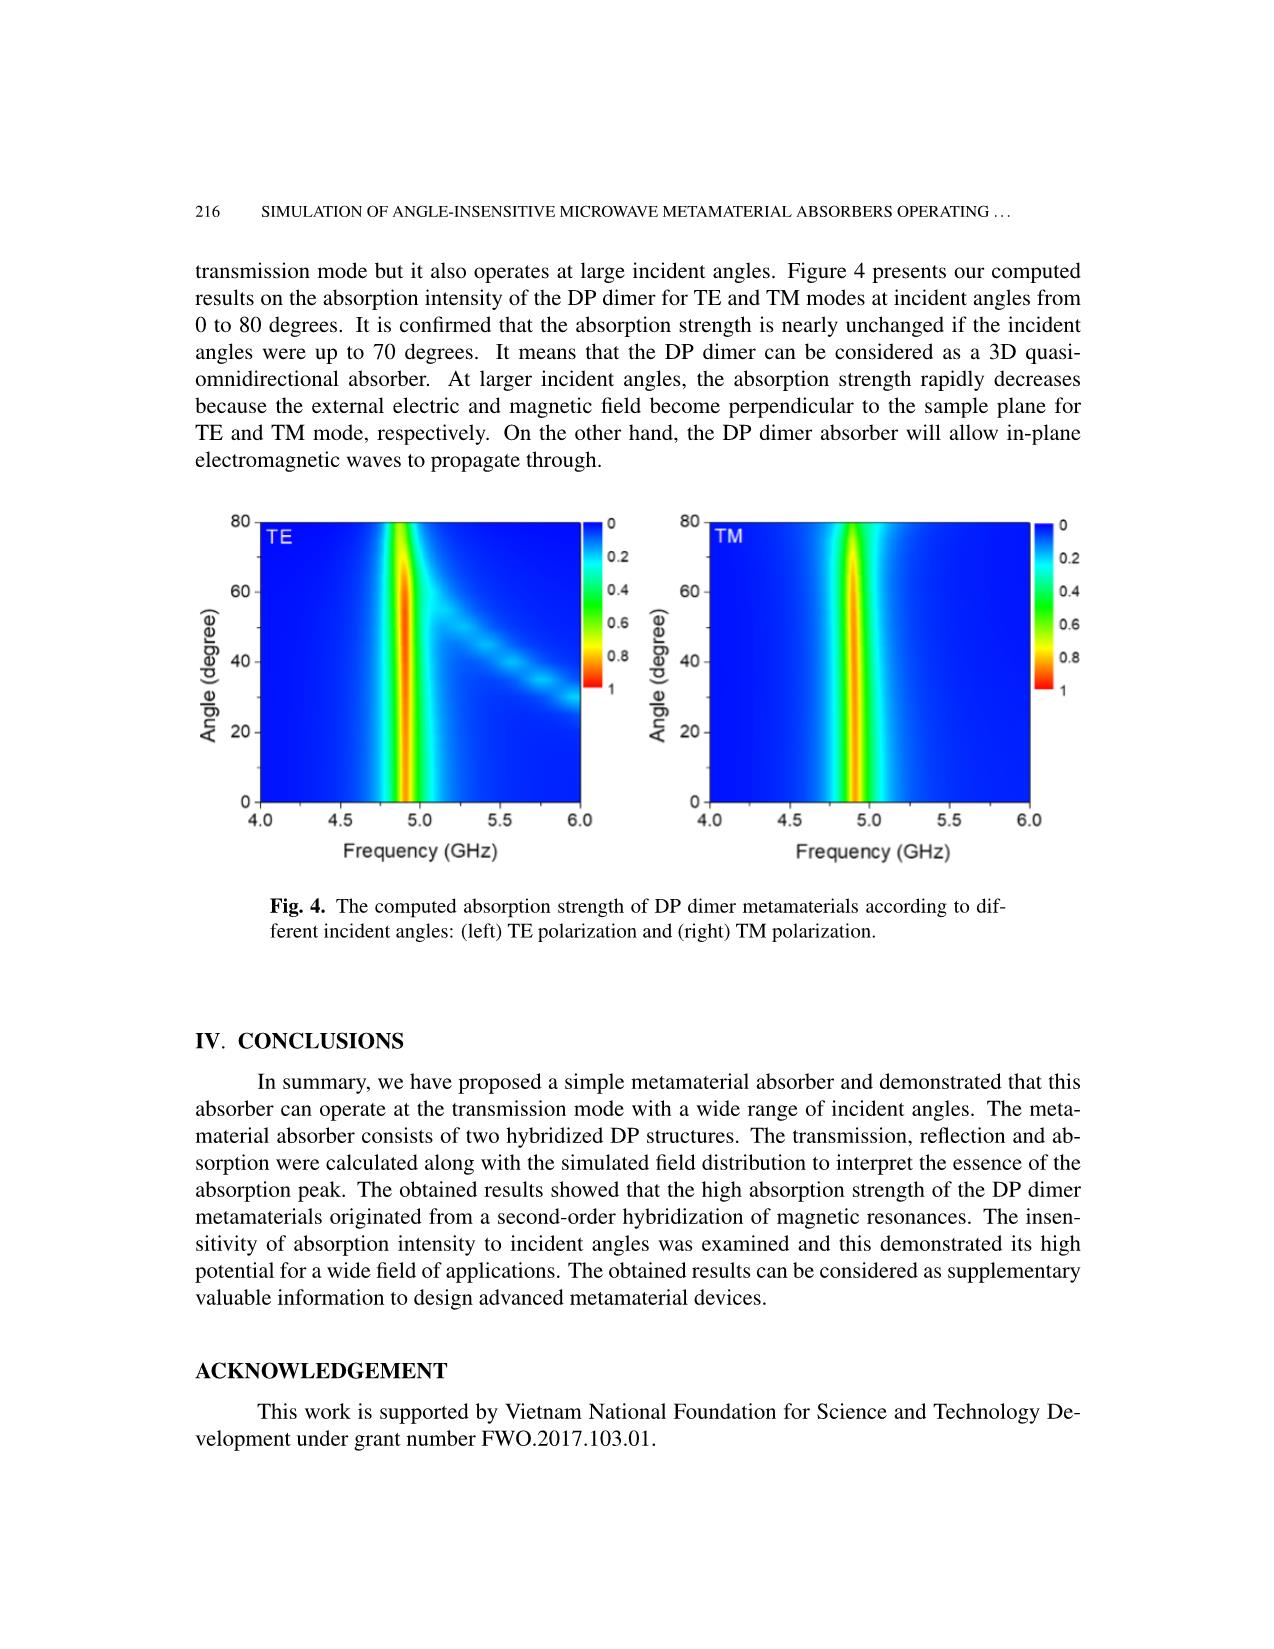 Simulation of angle-insensitive microwave metamaterial absorbers operating at transmission mode trang 6